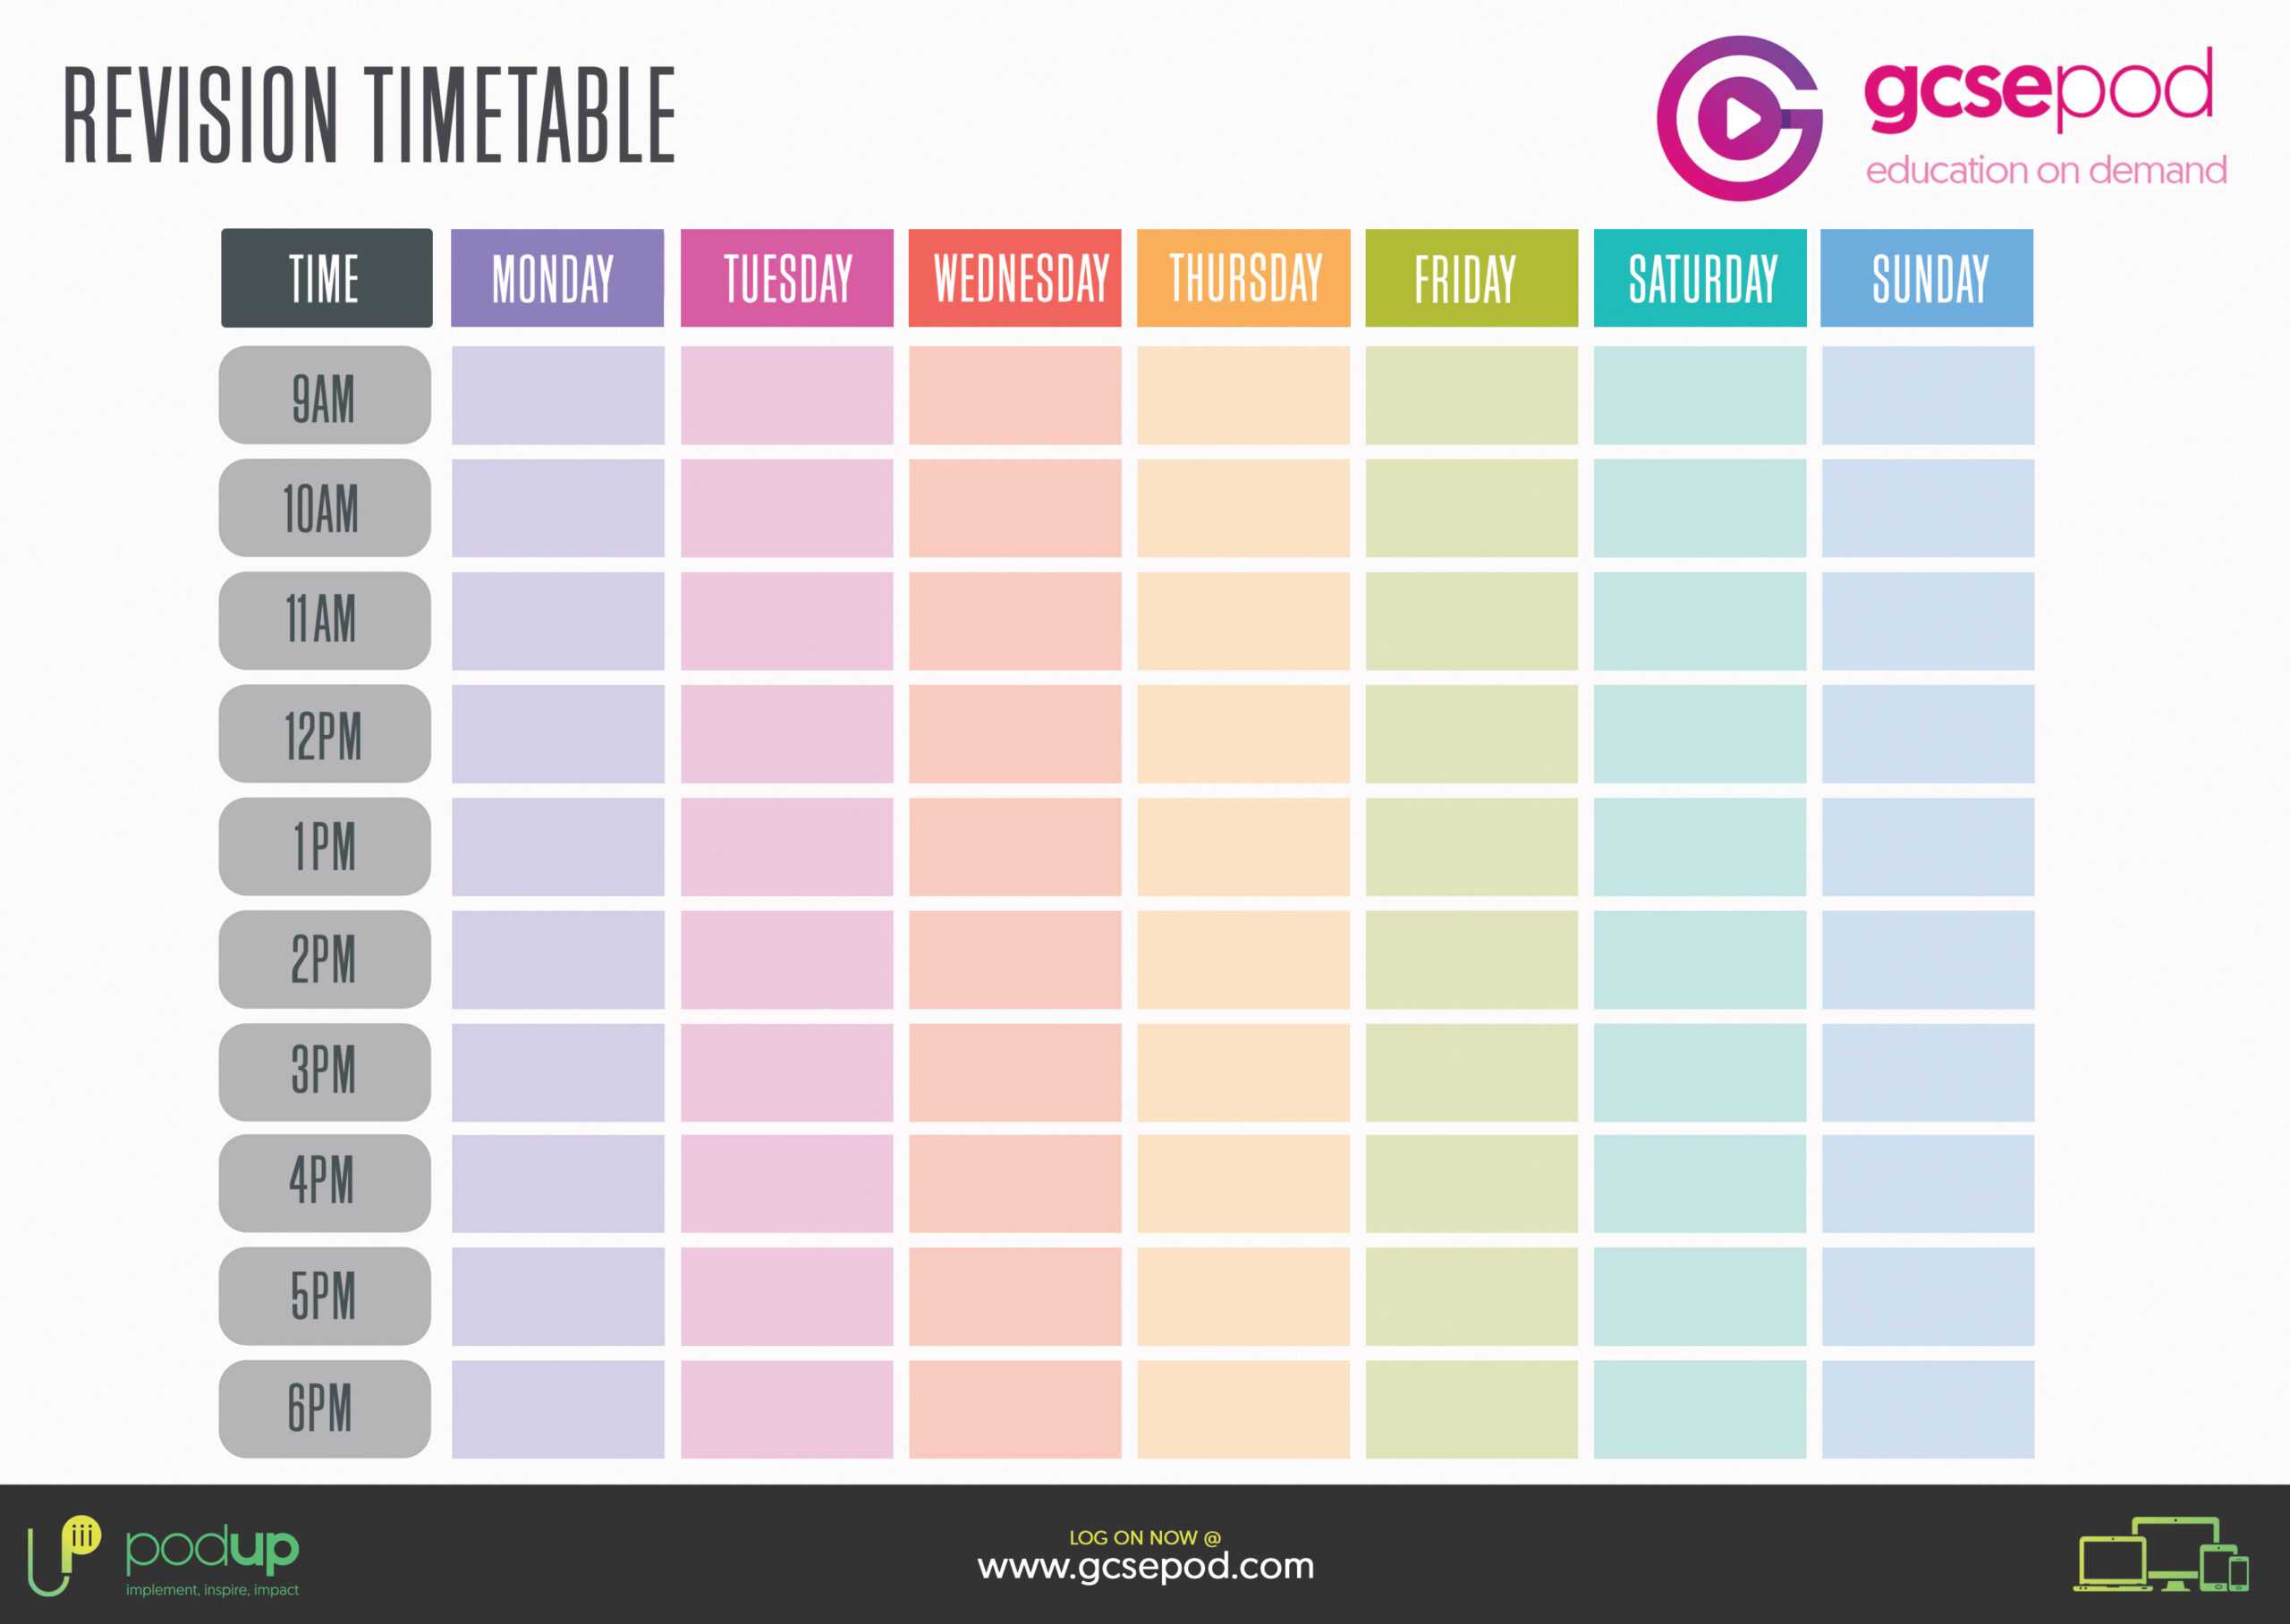 Student Resources | Gcsepod Intended For Blank Revision Timetable Template